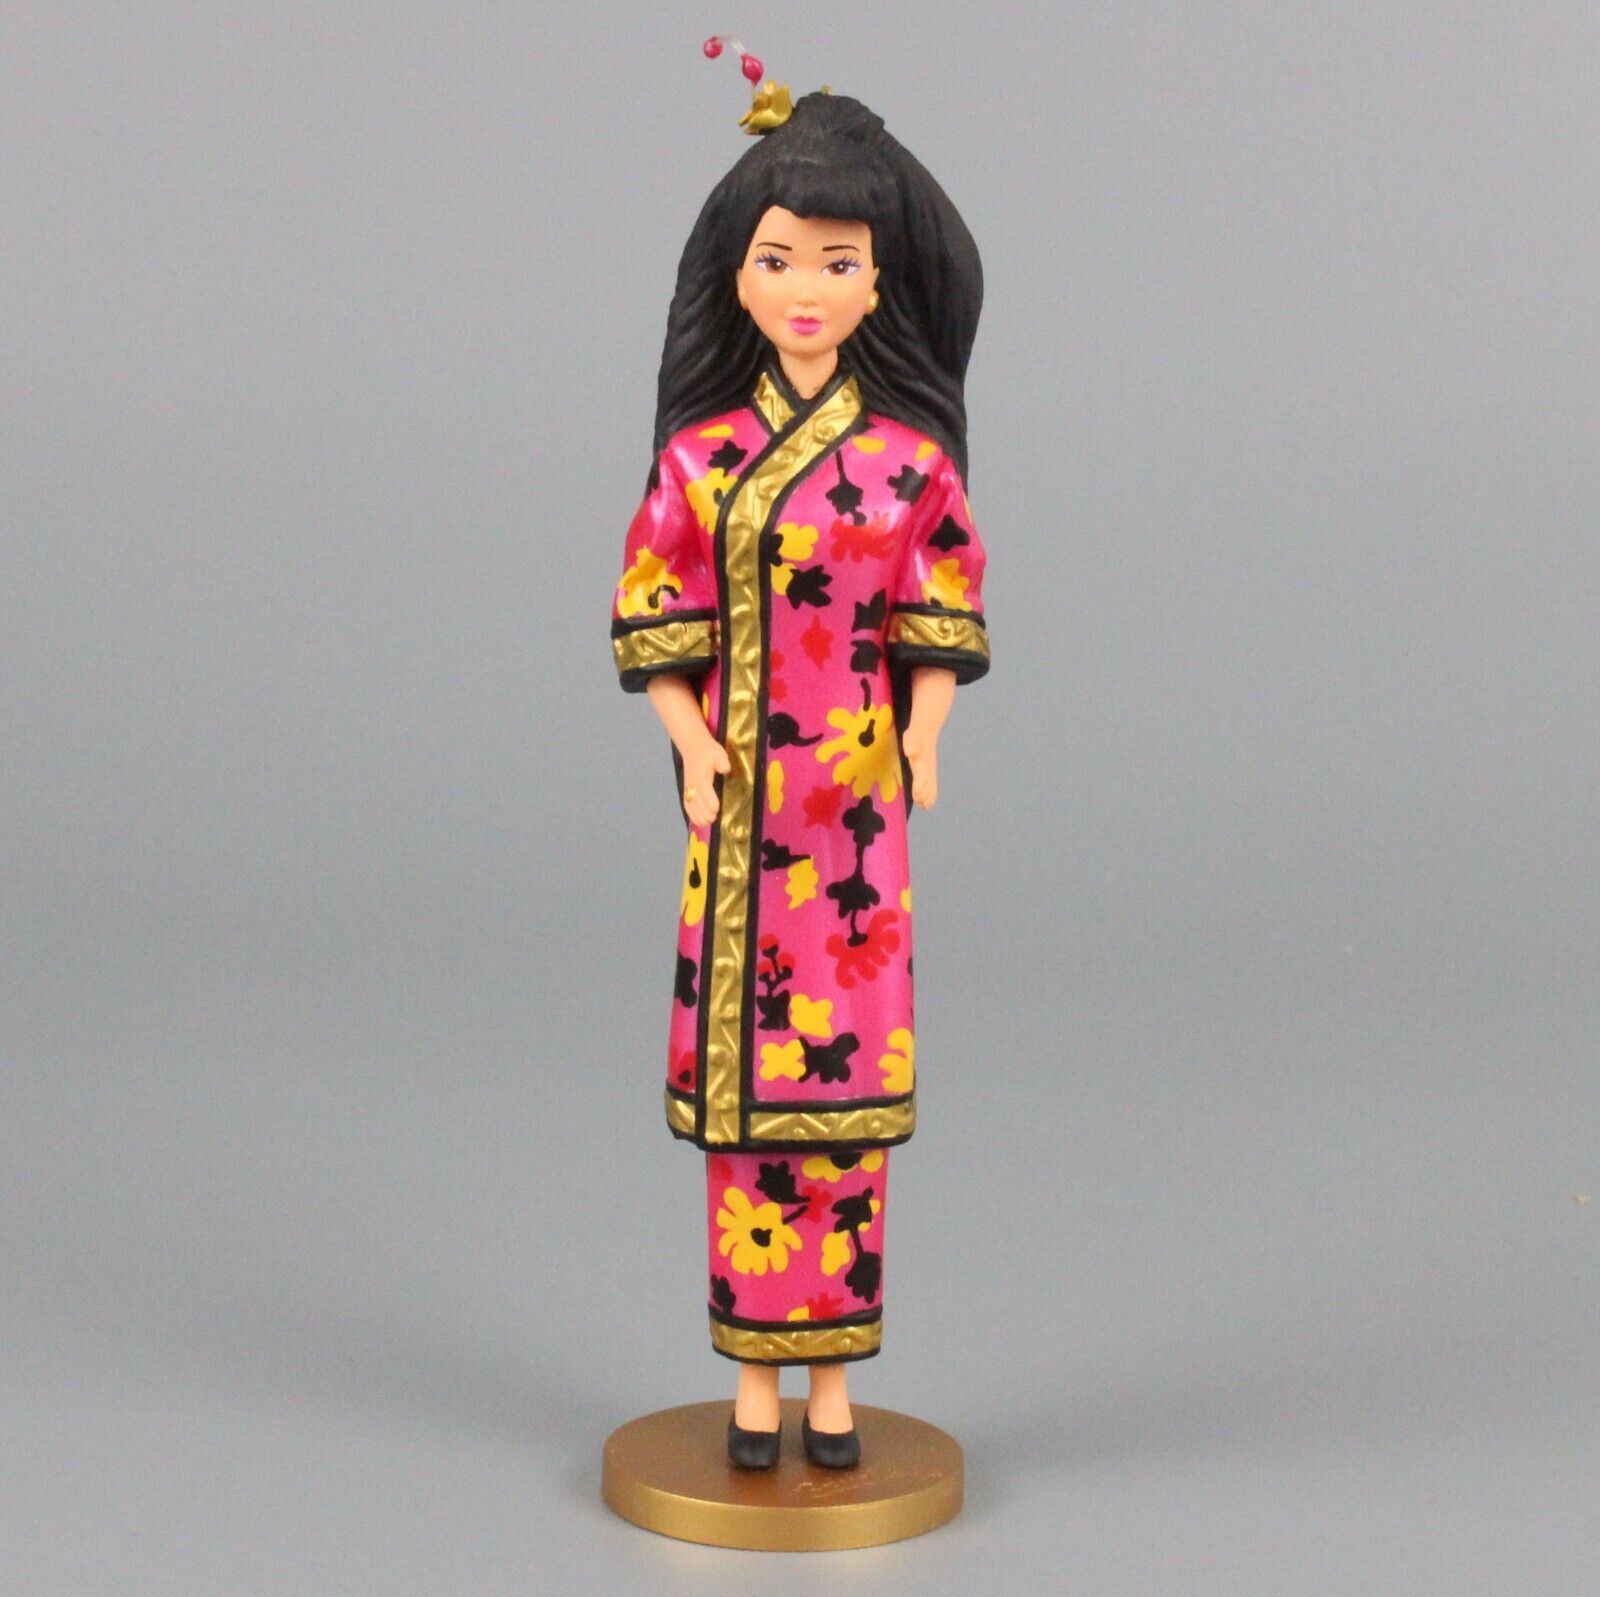 Hallmark Barbie Ornament CHINESE Barbie 2nd in Series 1997 Dolls of the World